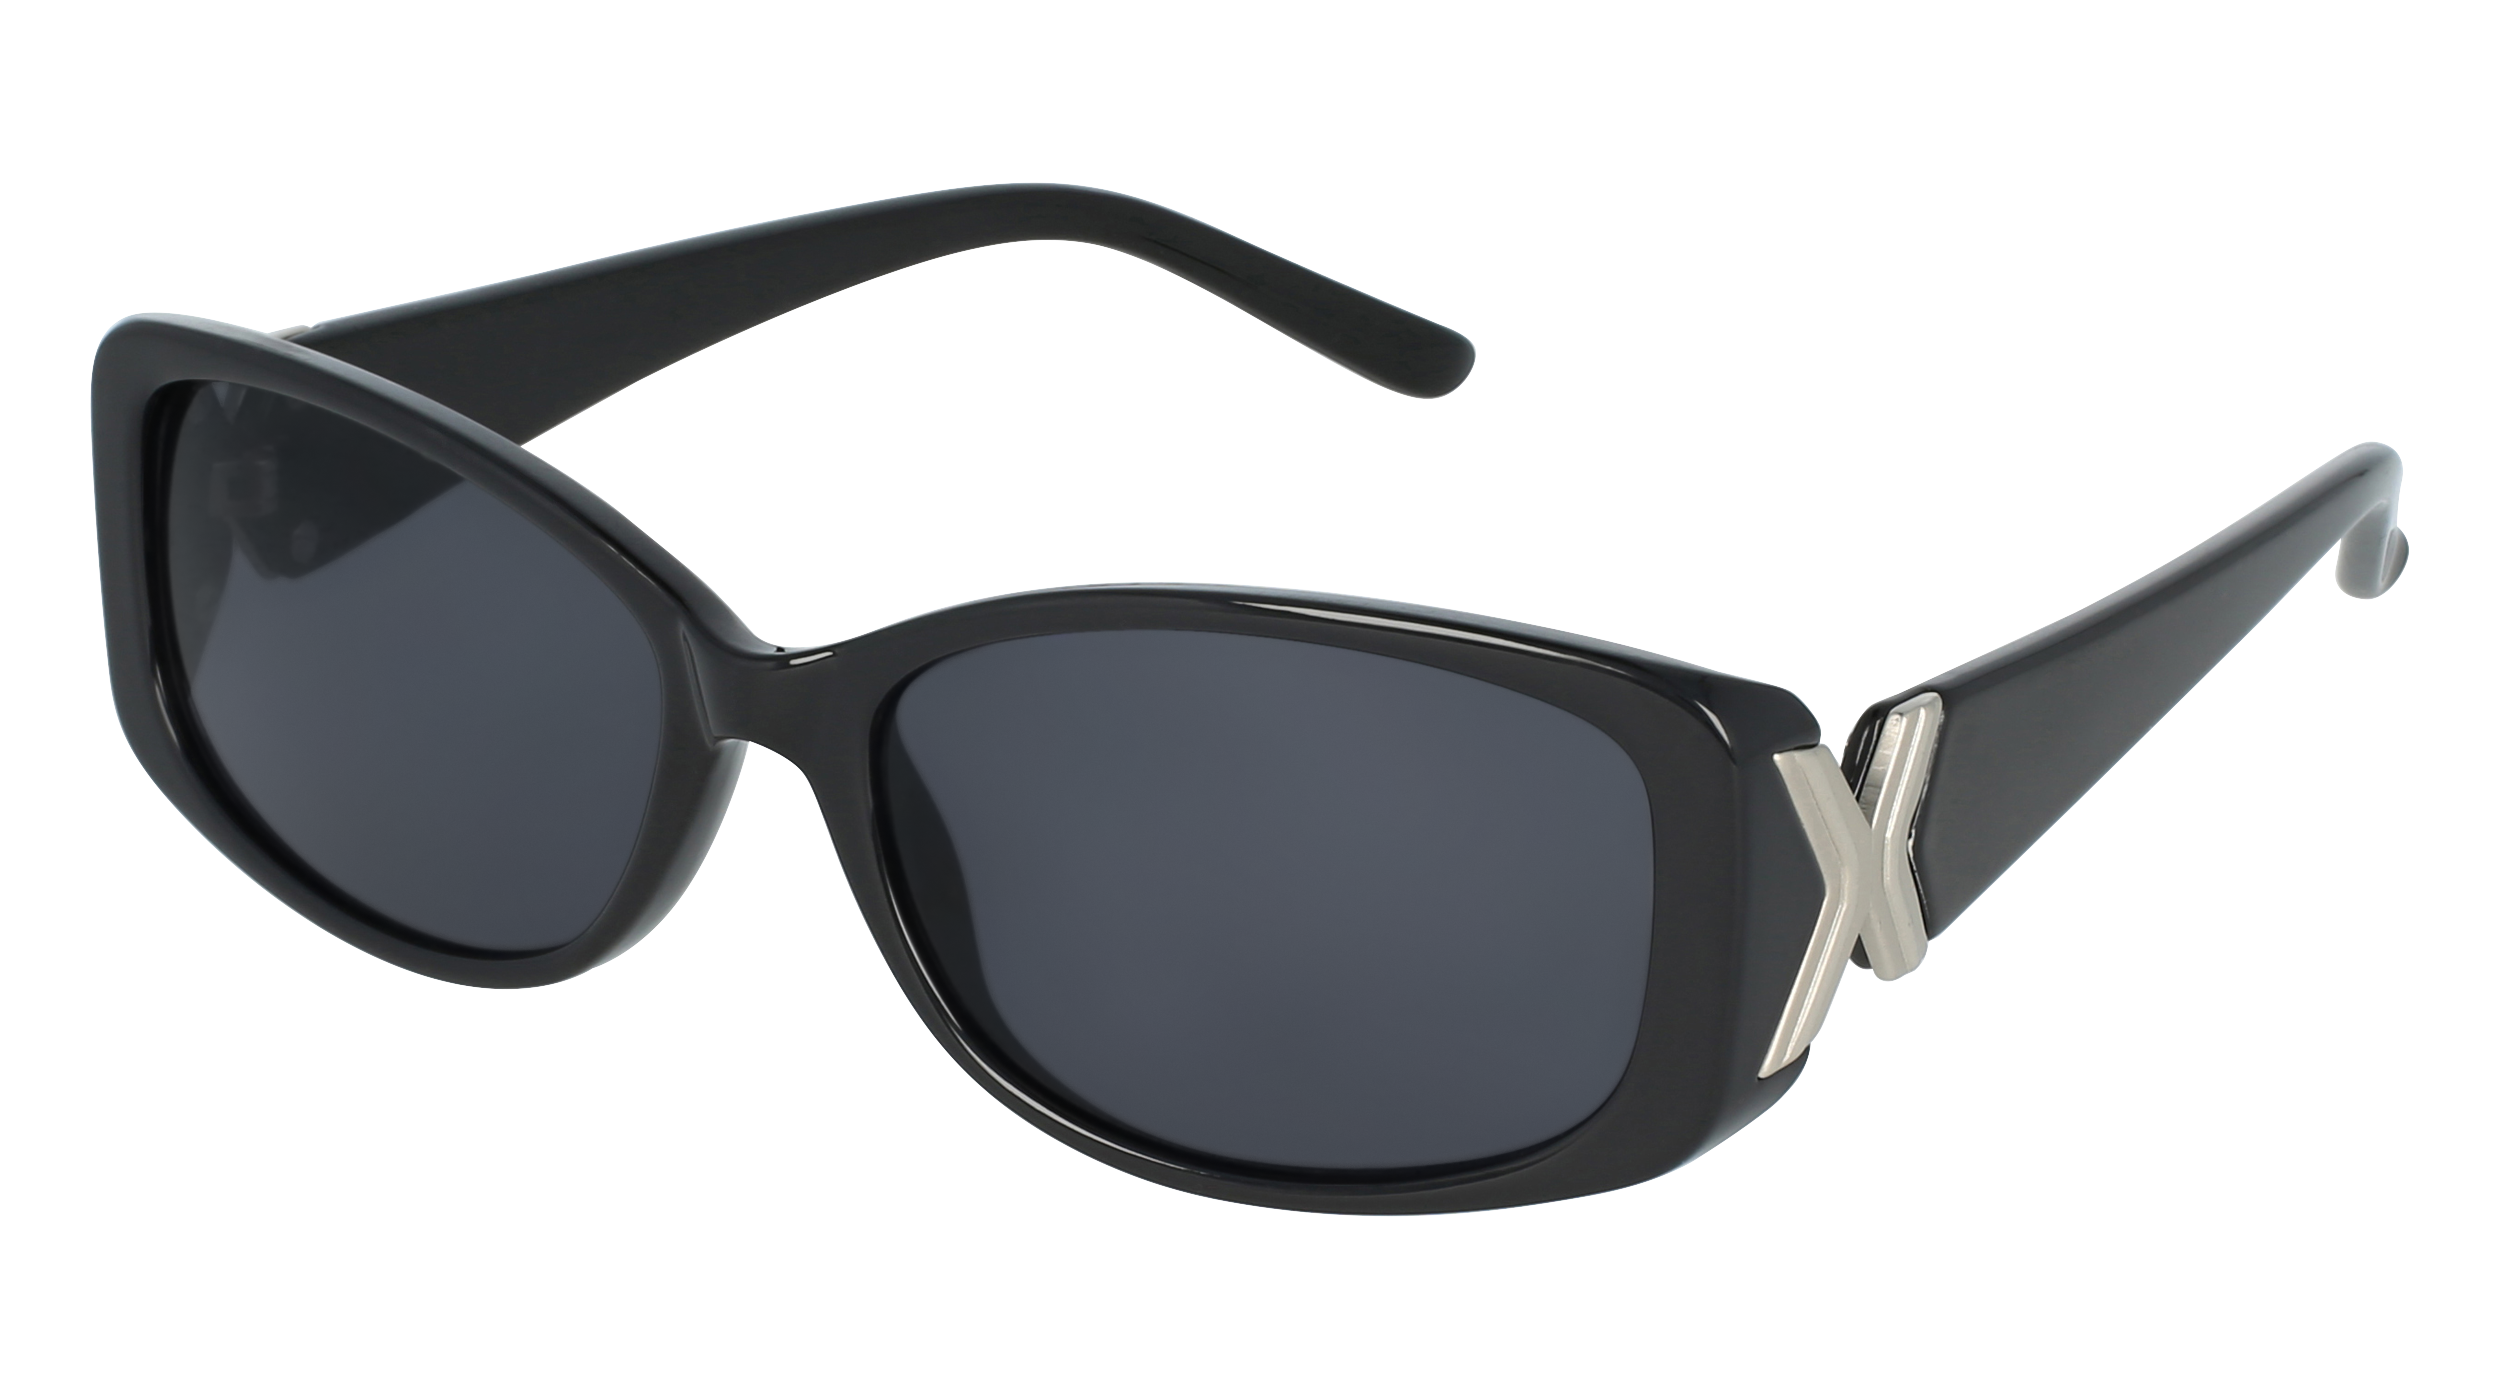 N S 716 women's sunglasses (from the side)